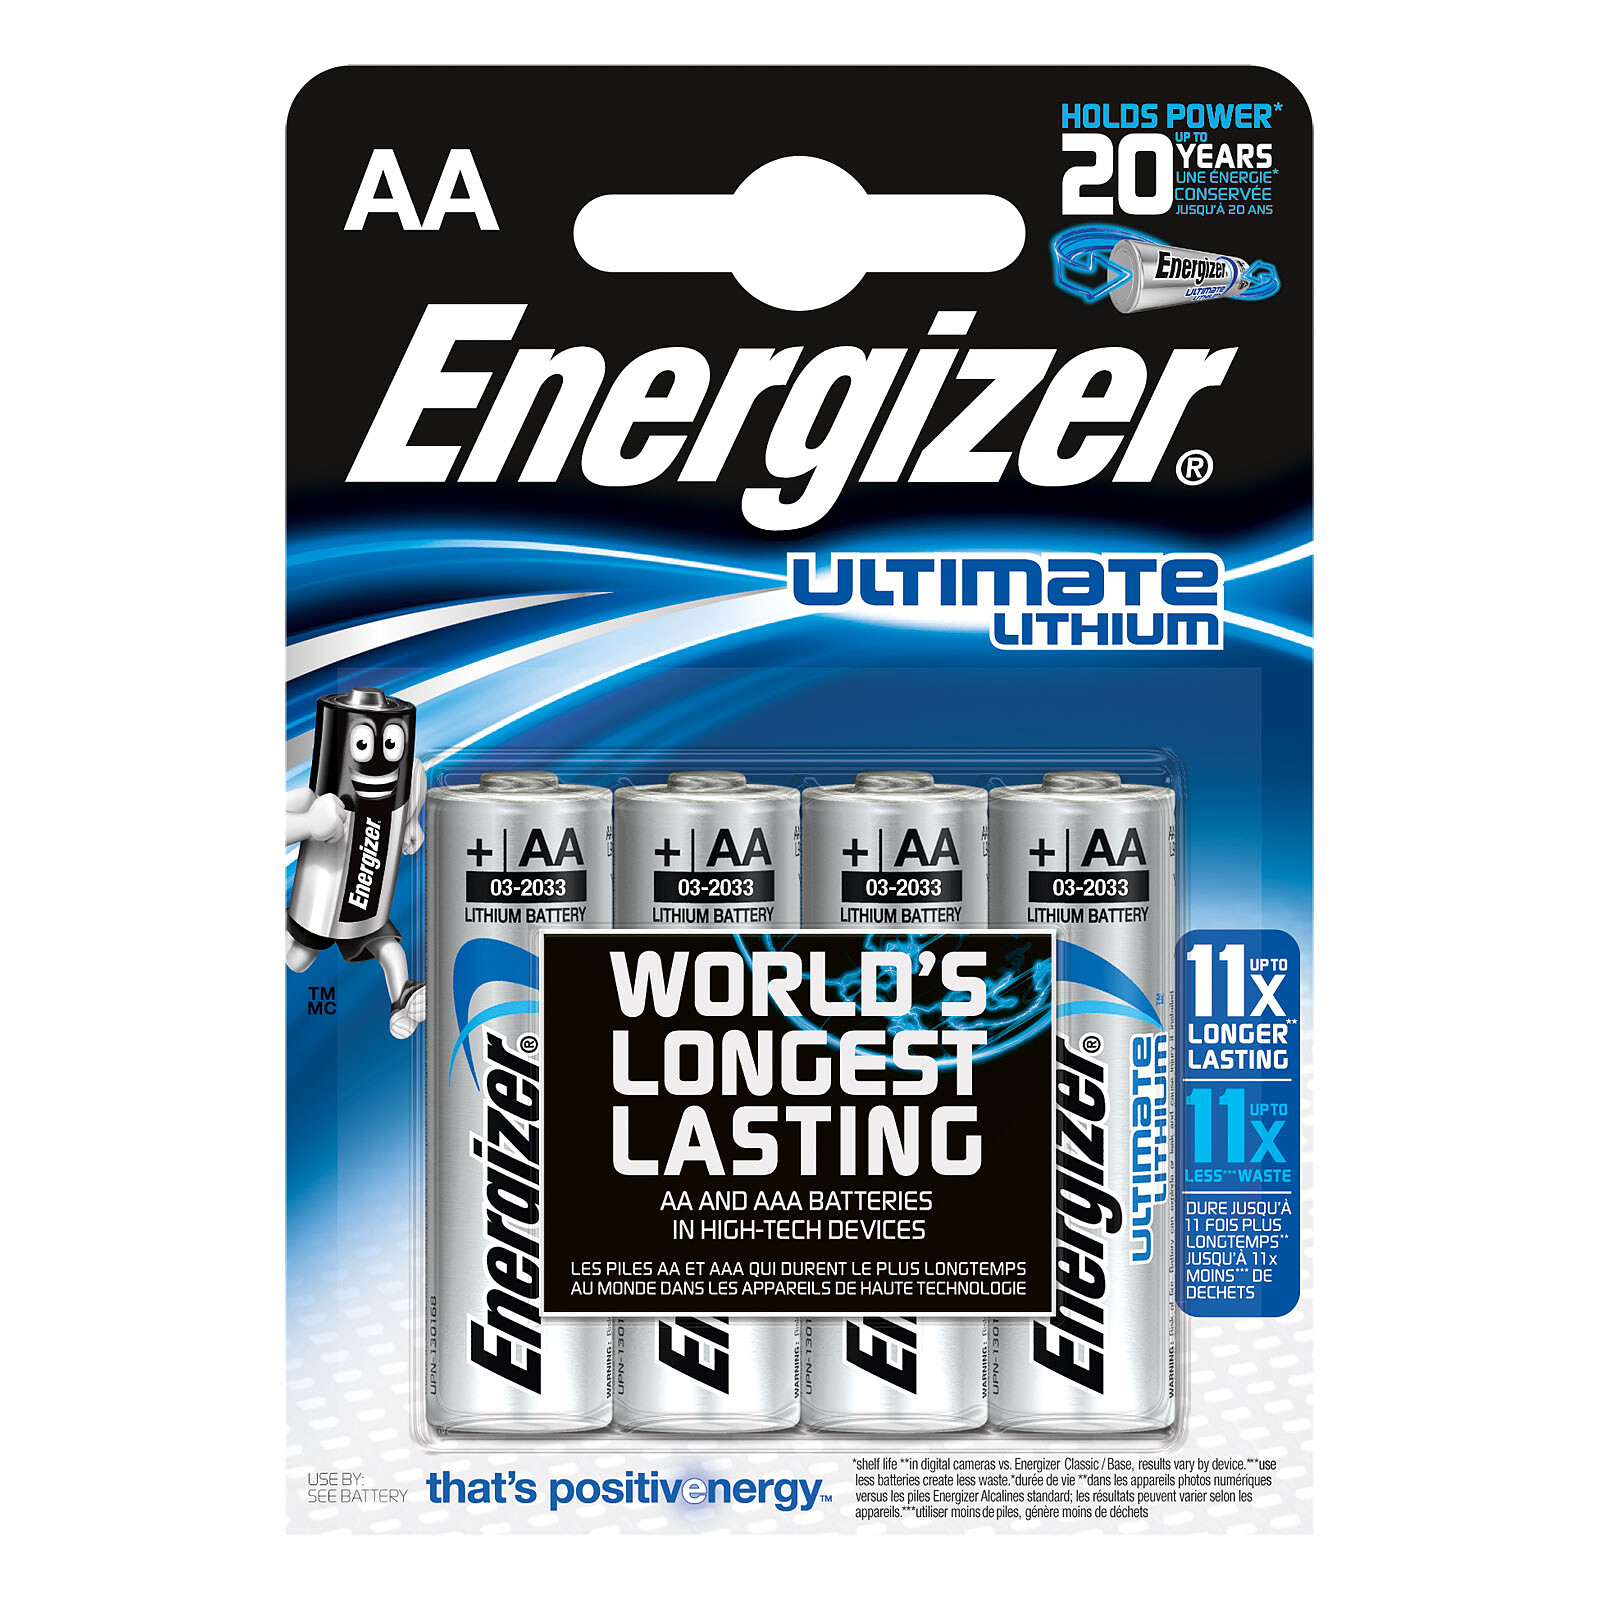 Energizer Ultimate Lithium AA (set of 4) - Battery & charger - LDLC